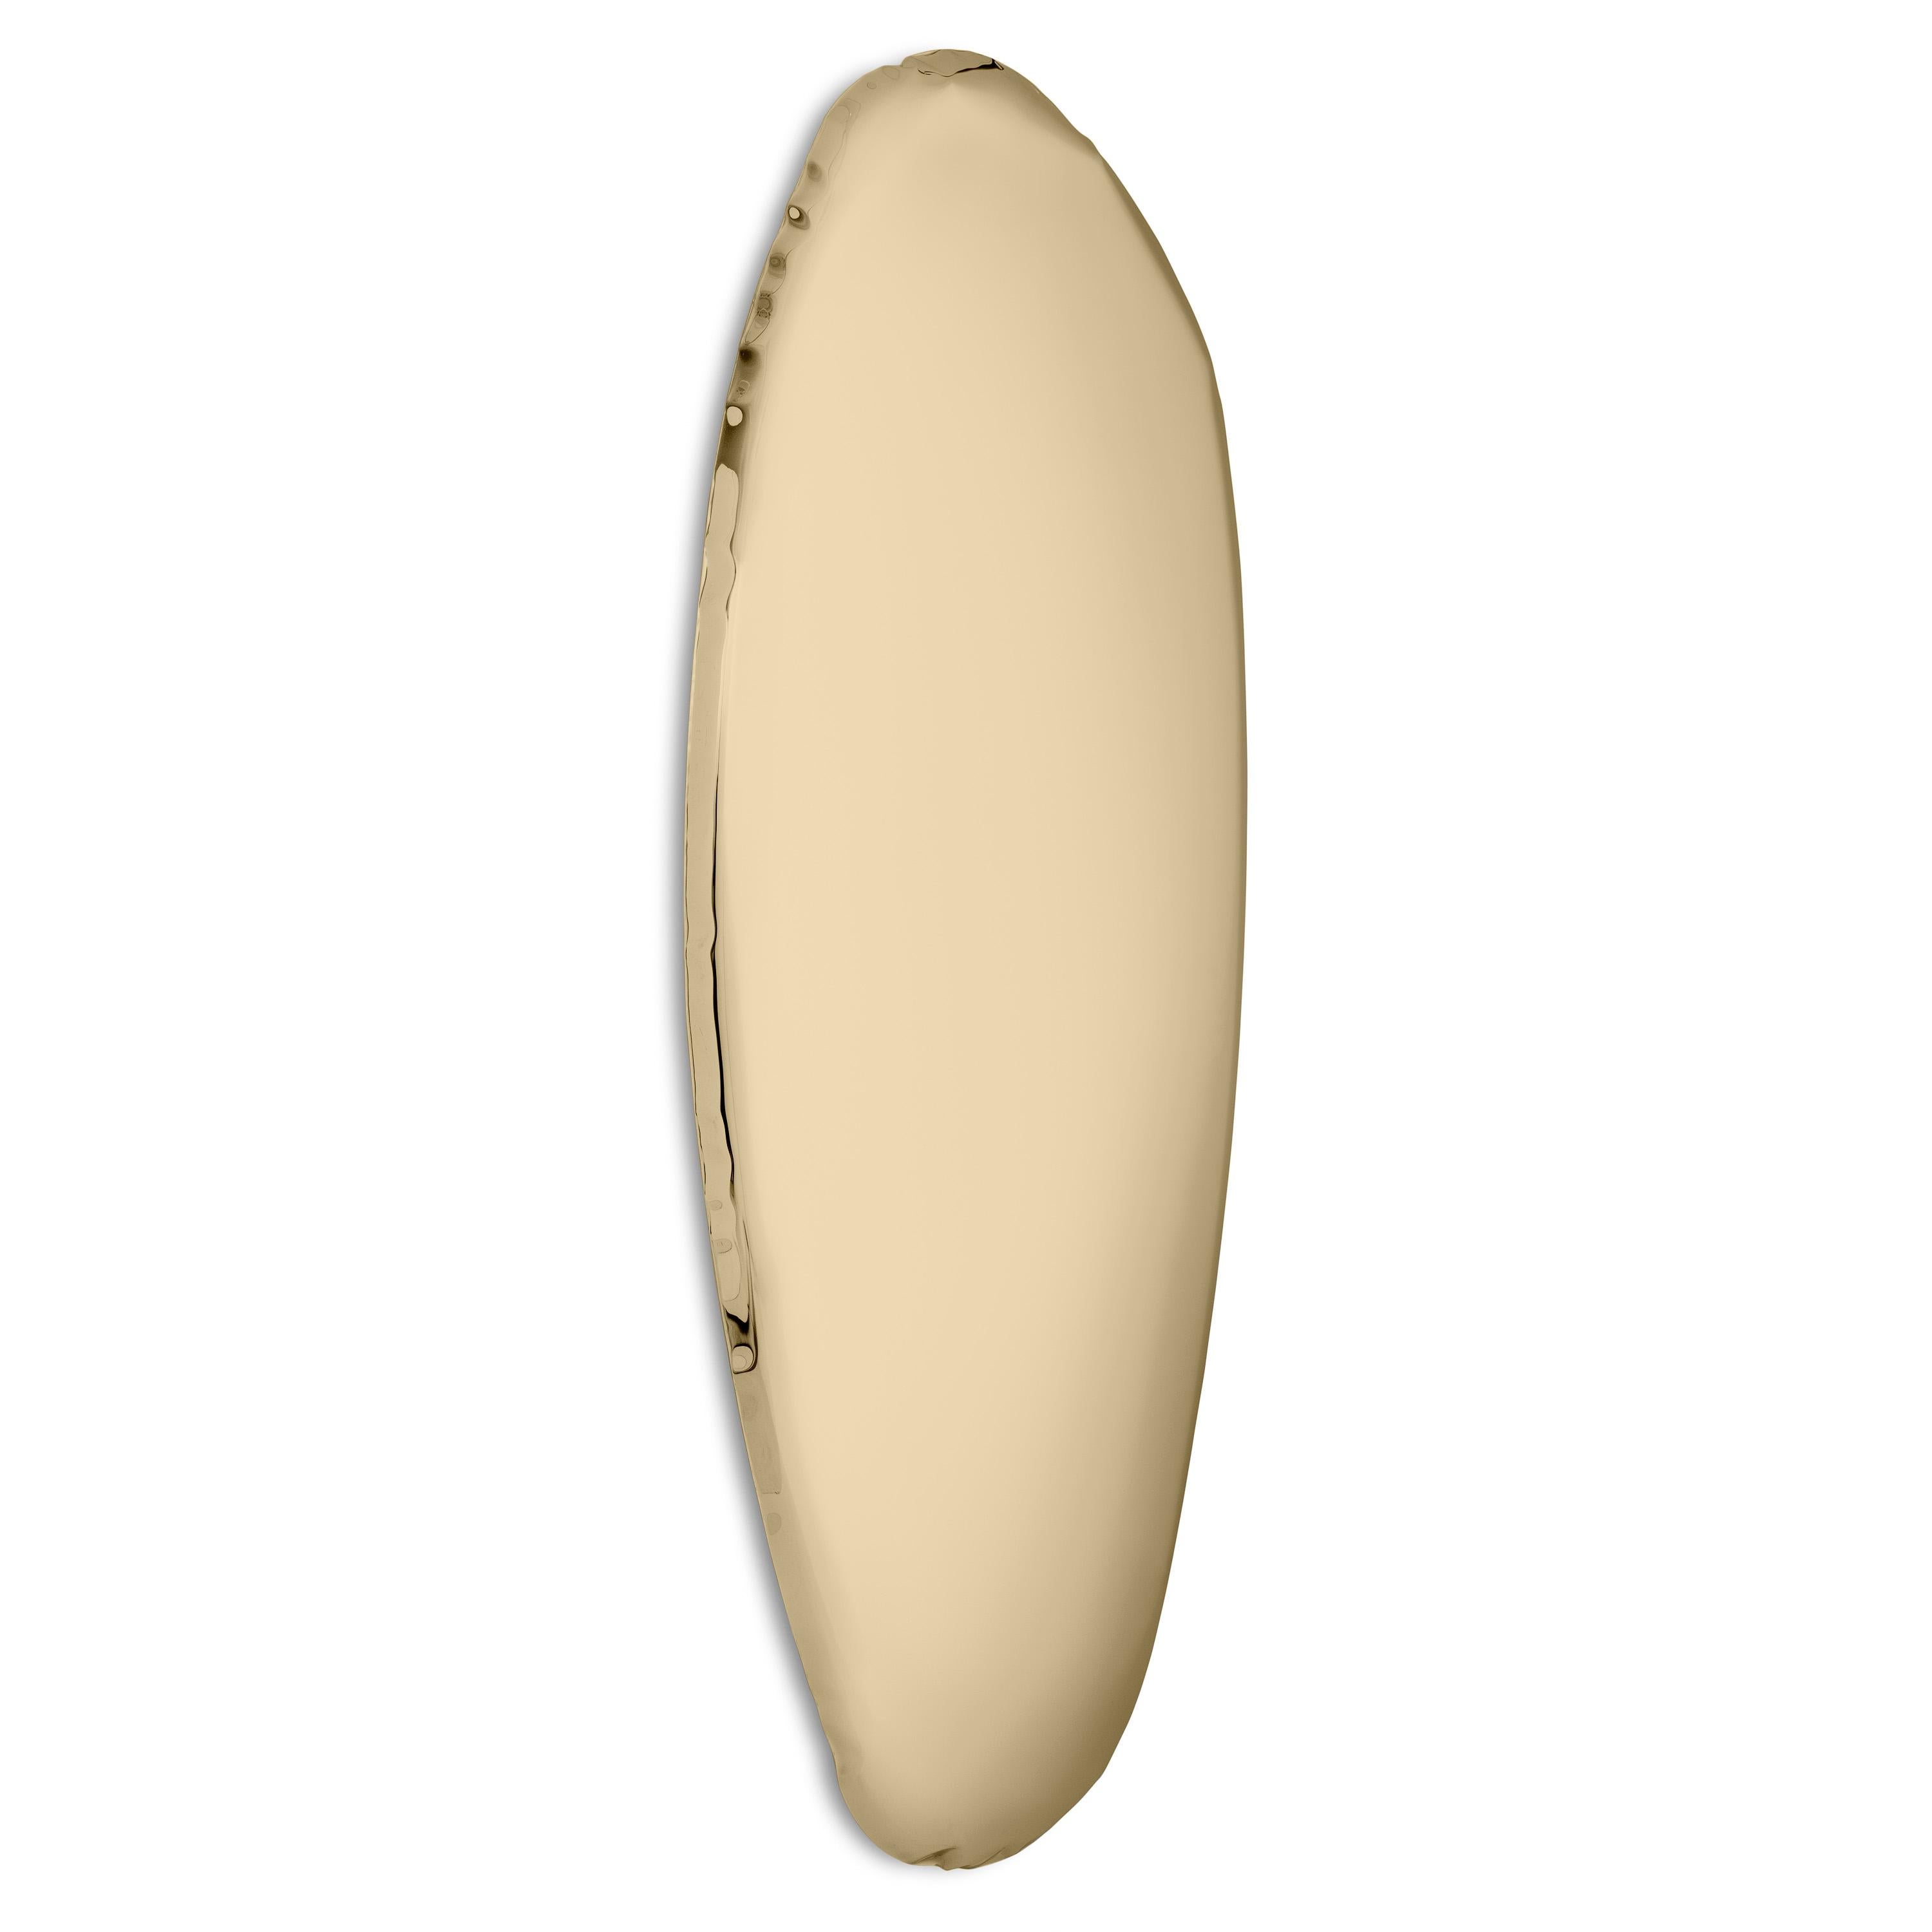 Contemporary Mirror 'Tafla O1', AURUM Collection, Rose Gold, by Zieta In New Condition For Sale In Paris, FR